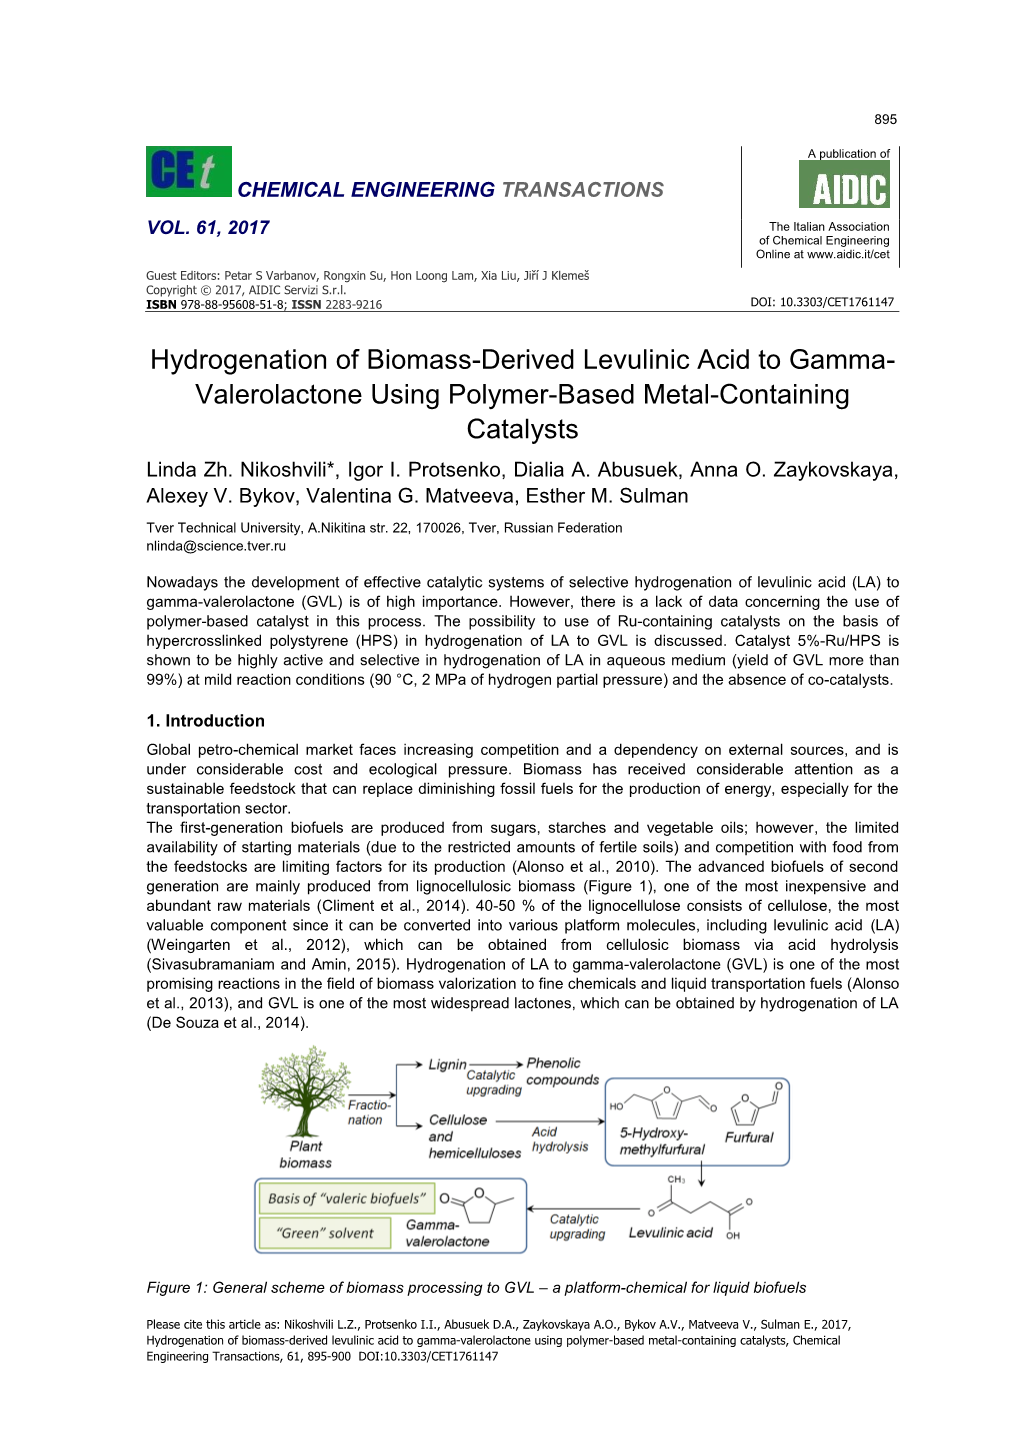 Valerolactone Using Polymer-Based Metal-Containing Catalysts, Chemical Engineering Transactions, 61, 895-900 DOI:10.3303/CET1761147 896